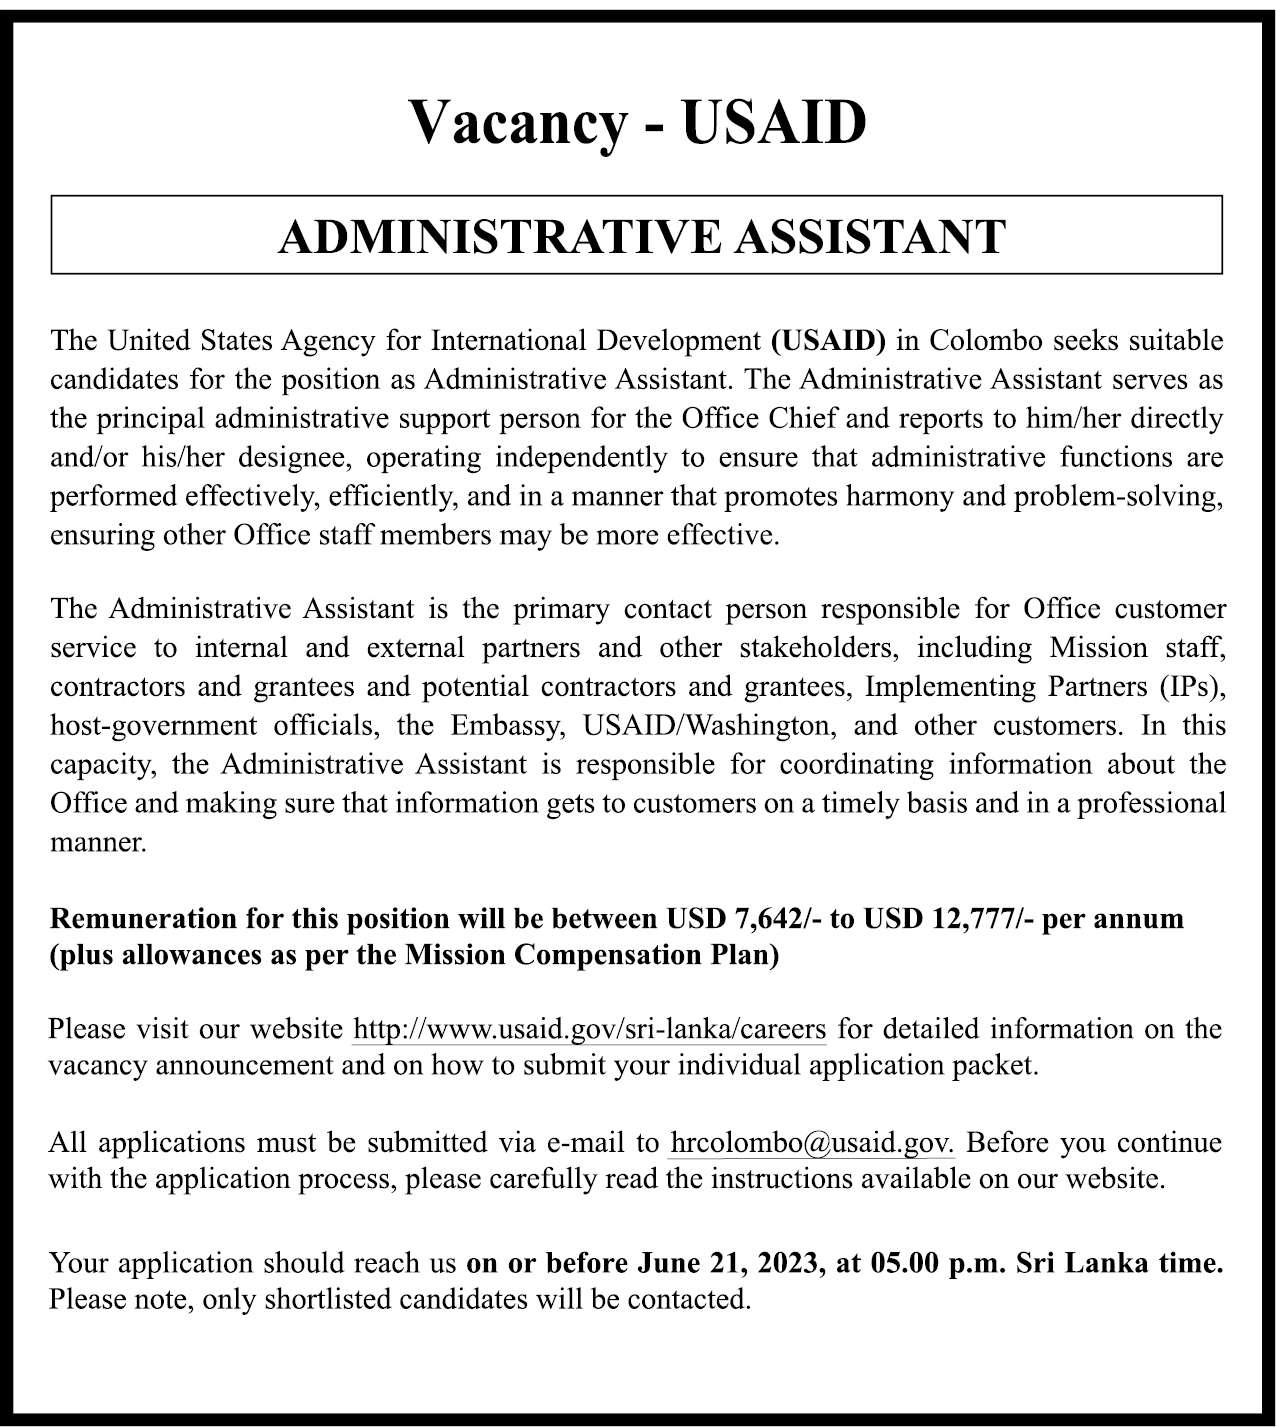 Administrative Assistant - USAID